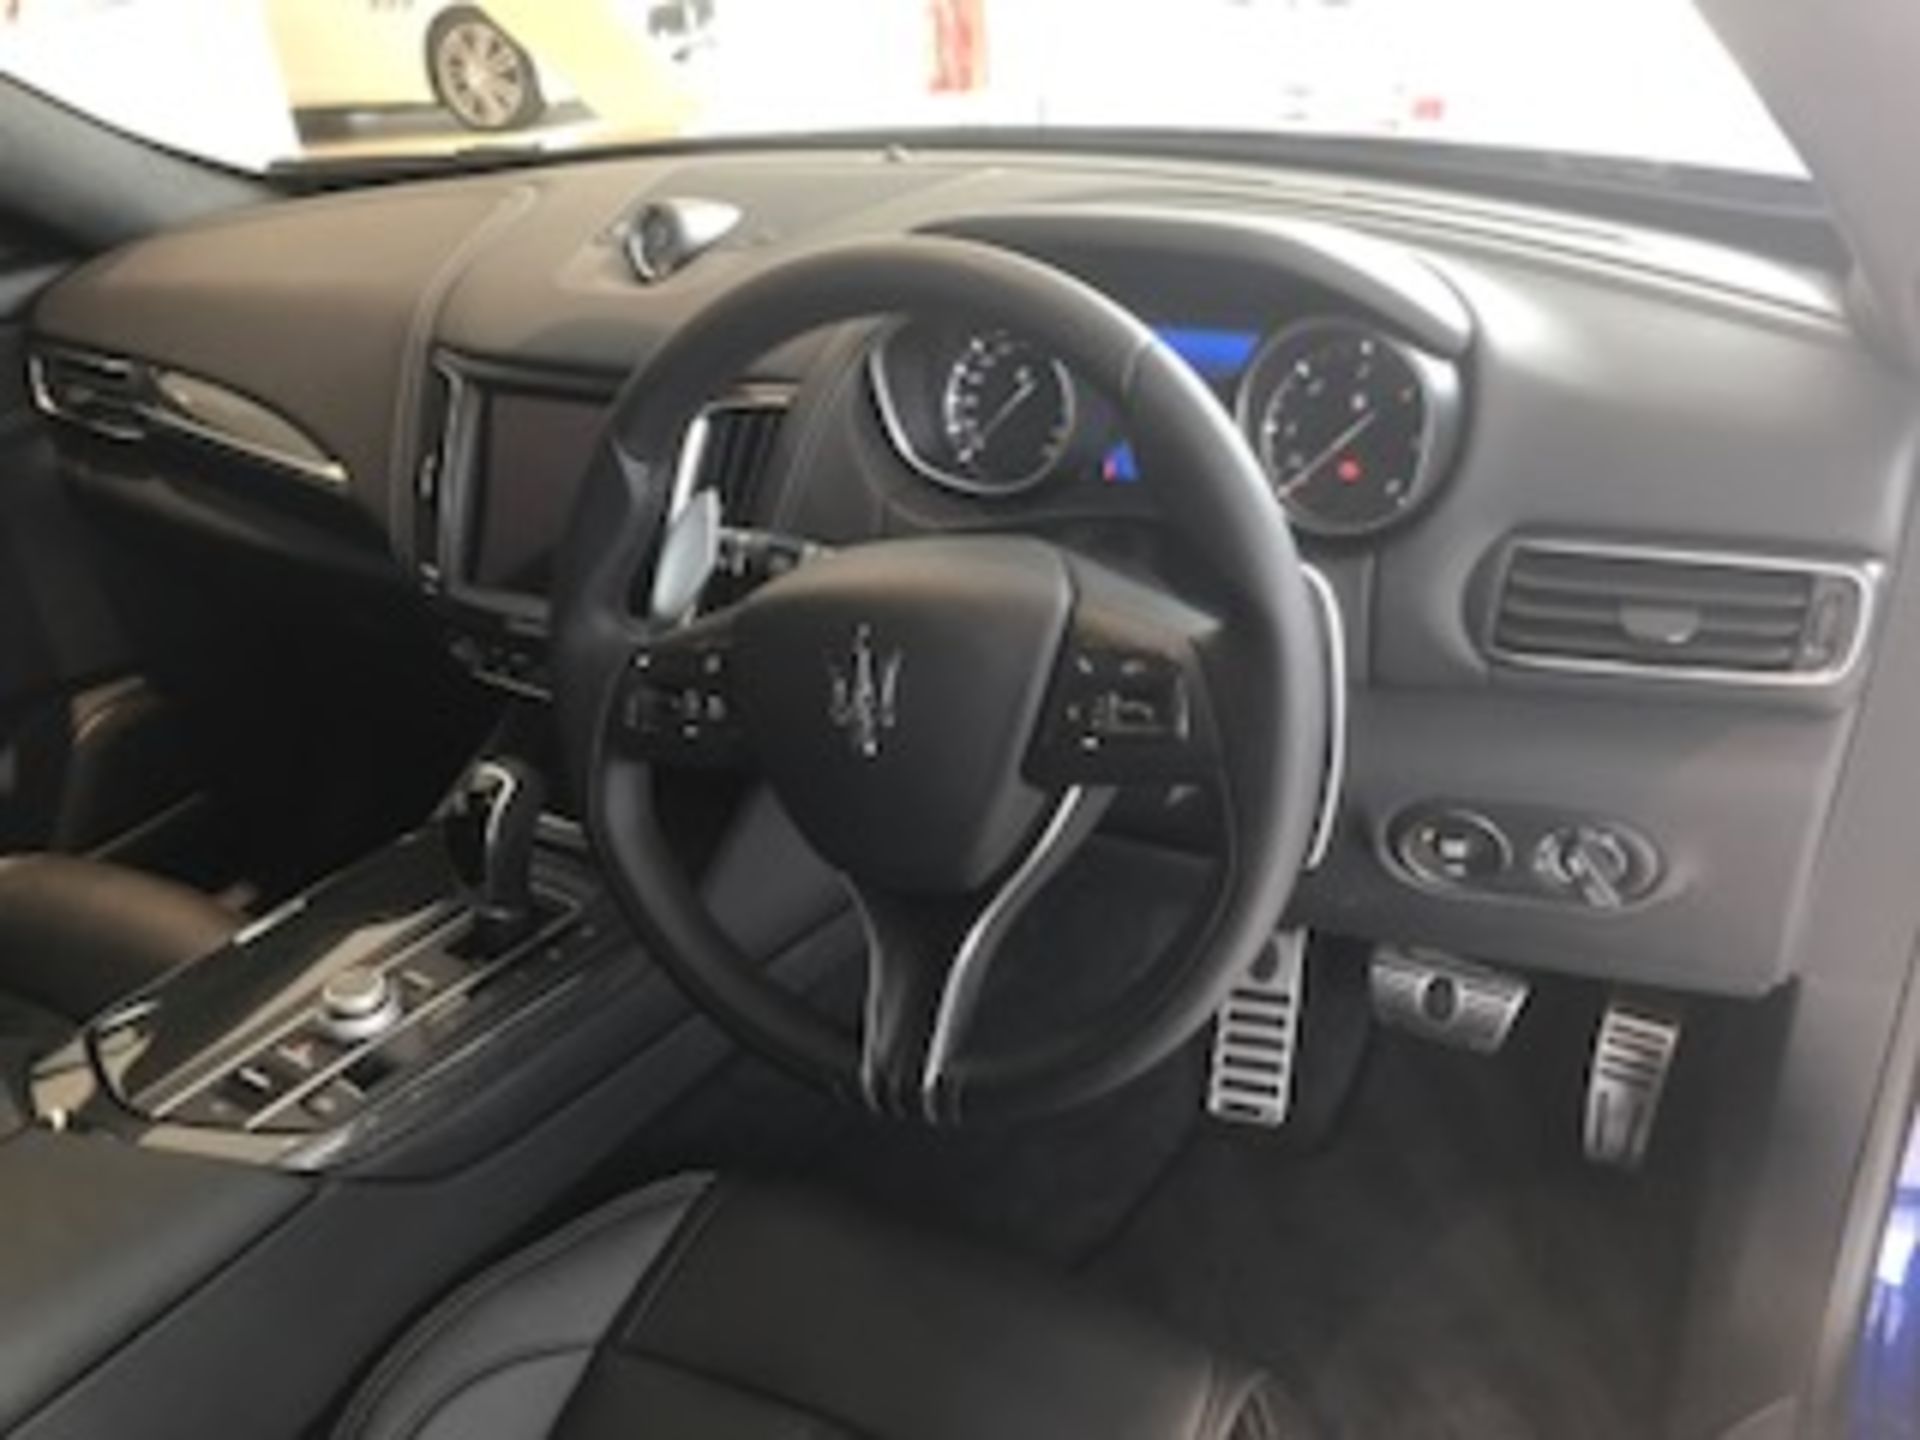 2017 Maserati Lavante 3L Turbo. 1 Owner From New. Low Mileage - Image 8 of 14